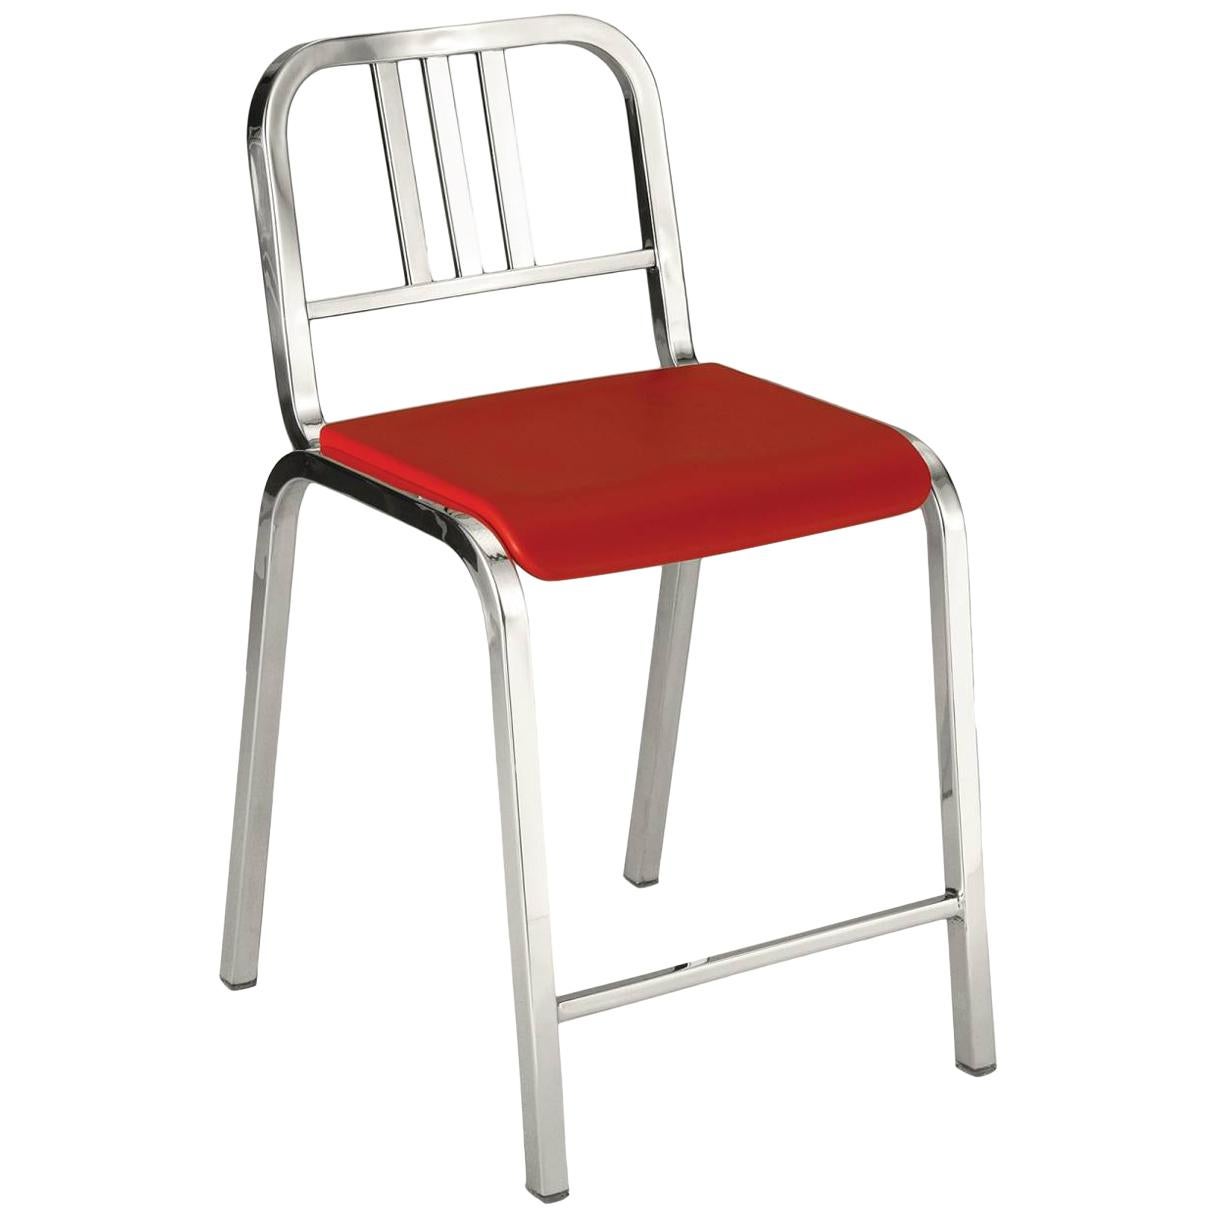 Emeco Nine-0 Counter Stool in Polished Aluminum with Red Seat by Ettore Sottsass